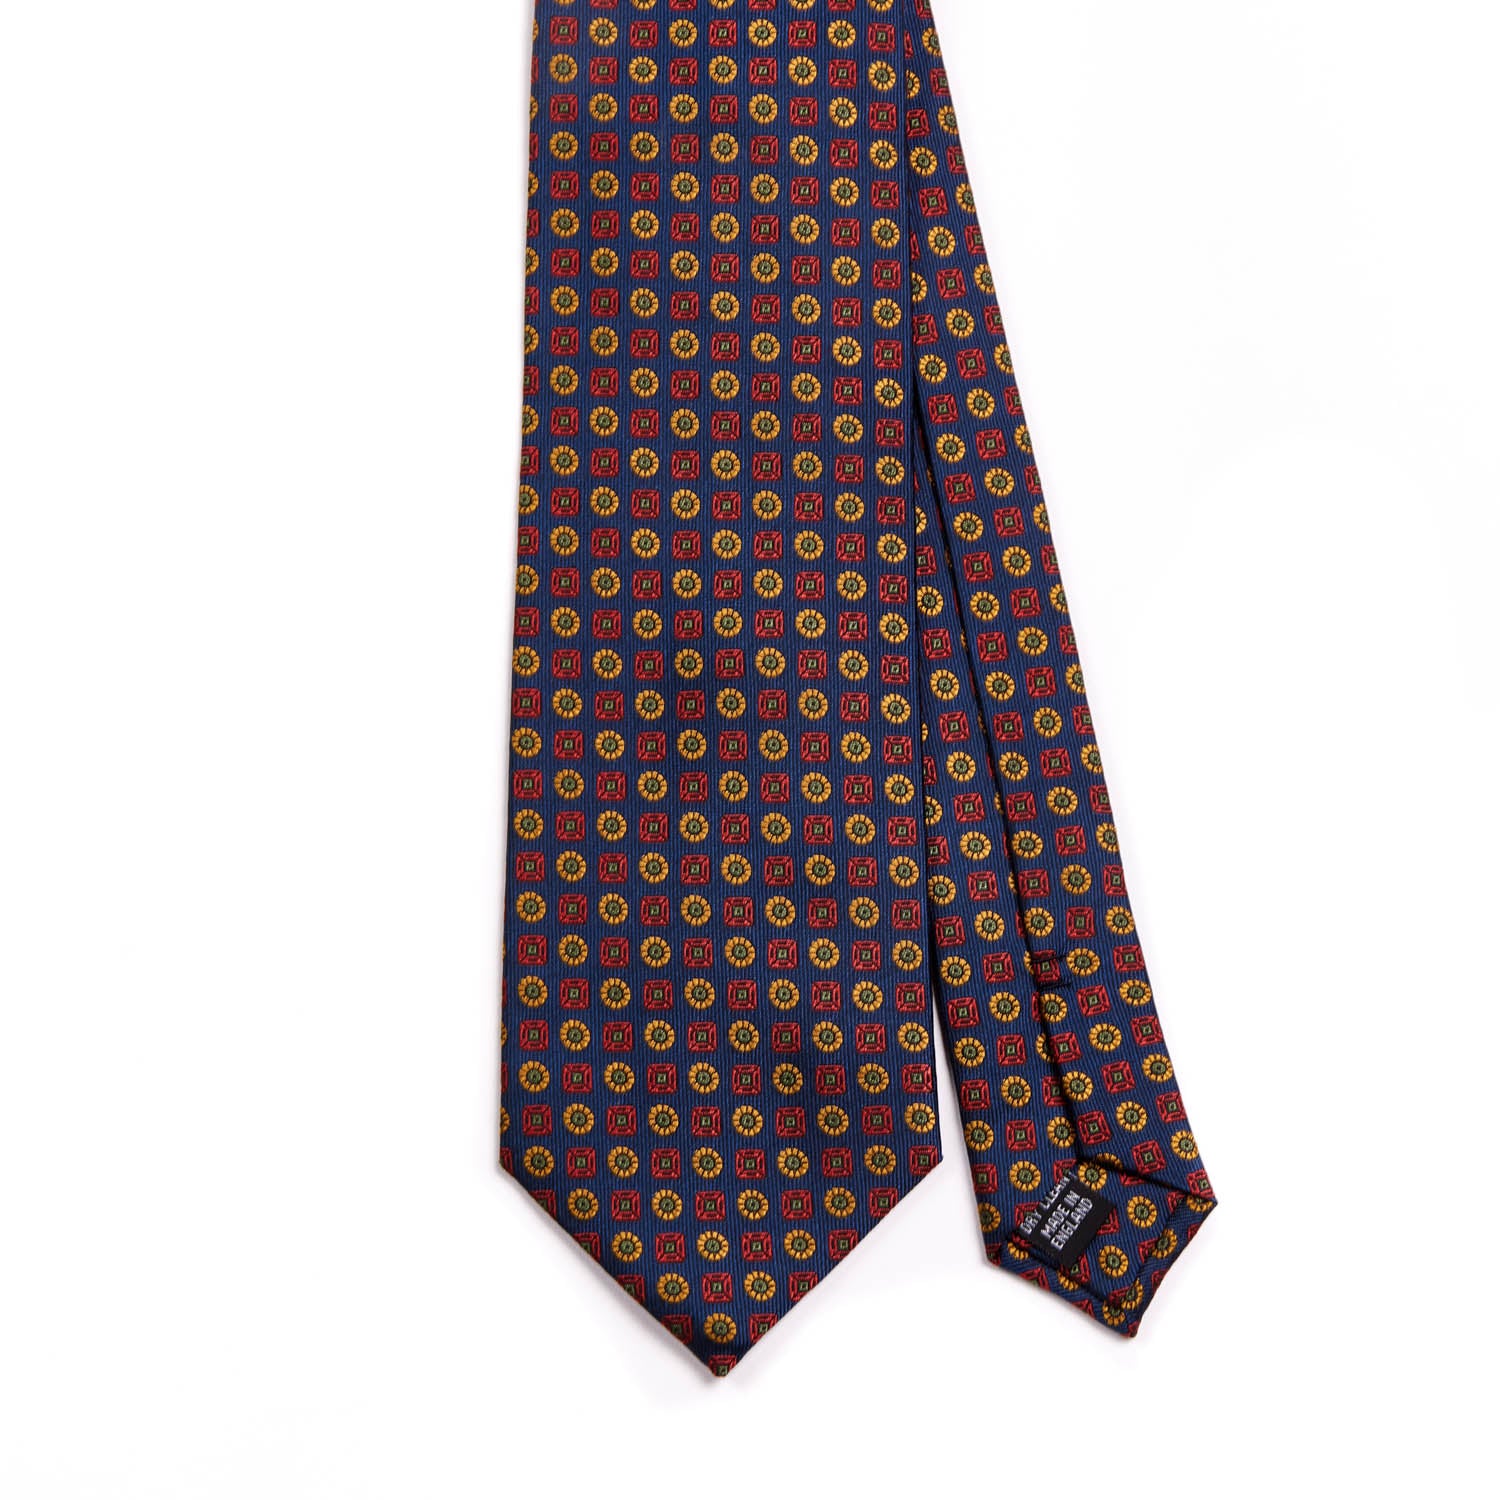 A Sovereign Grade Navy Floral Jacquard Tie, 150 cm by KirbyAllison.com with a red, blue, and yellow pattern providing longevity to your style.